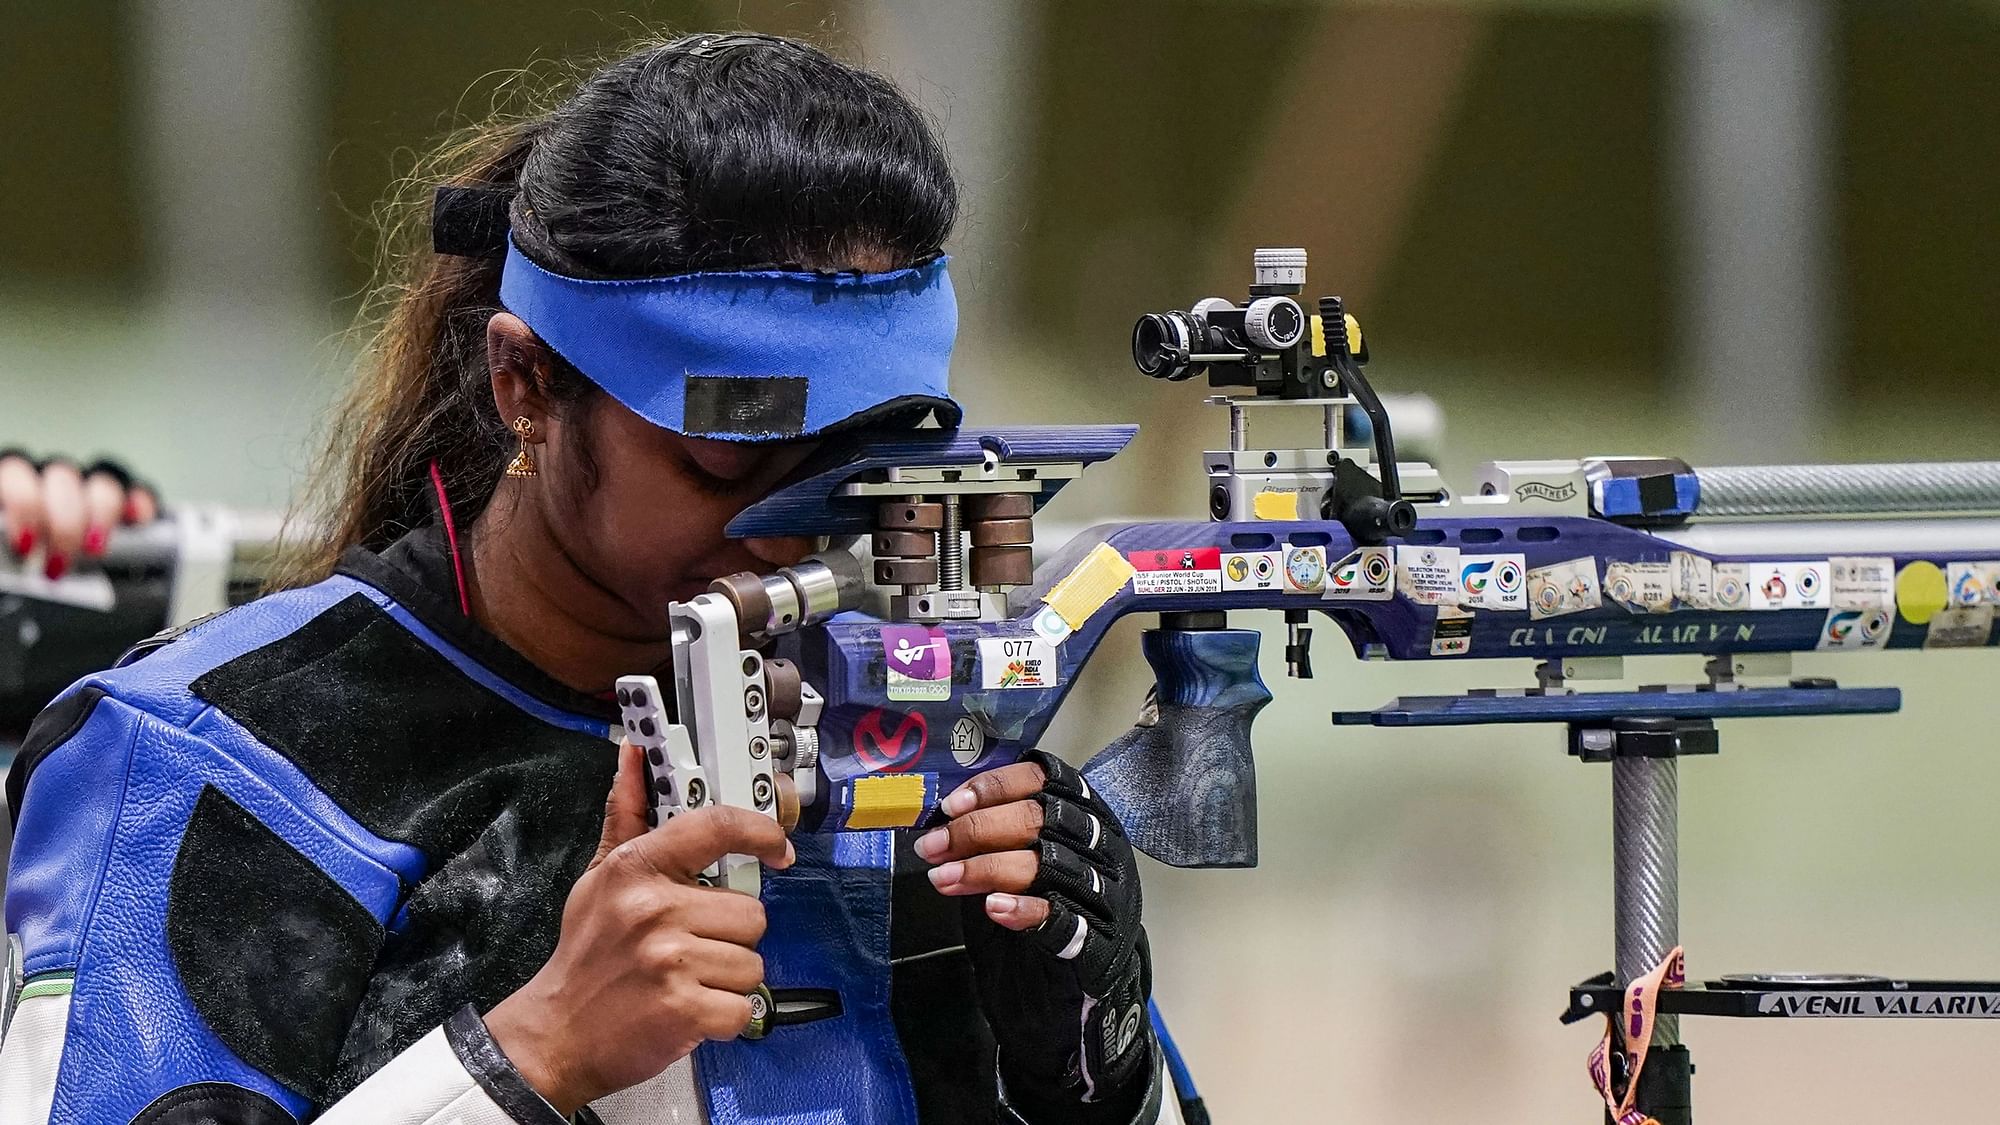 <div class="paragraphs"><p>Another poor day for Indian shooters at the Tokyo Olympics with 4 teams failing to enter the medal round of 2 mixed team events.</p></div>